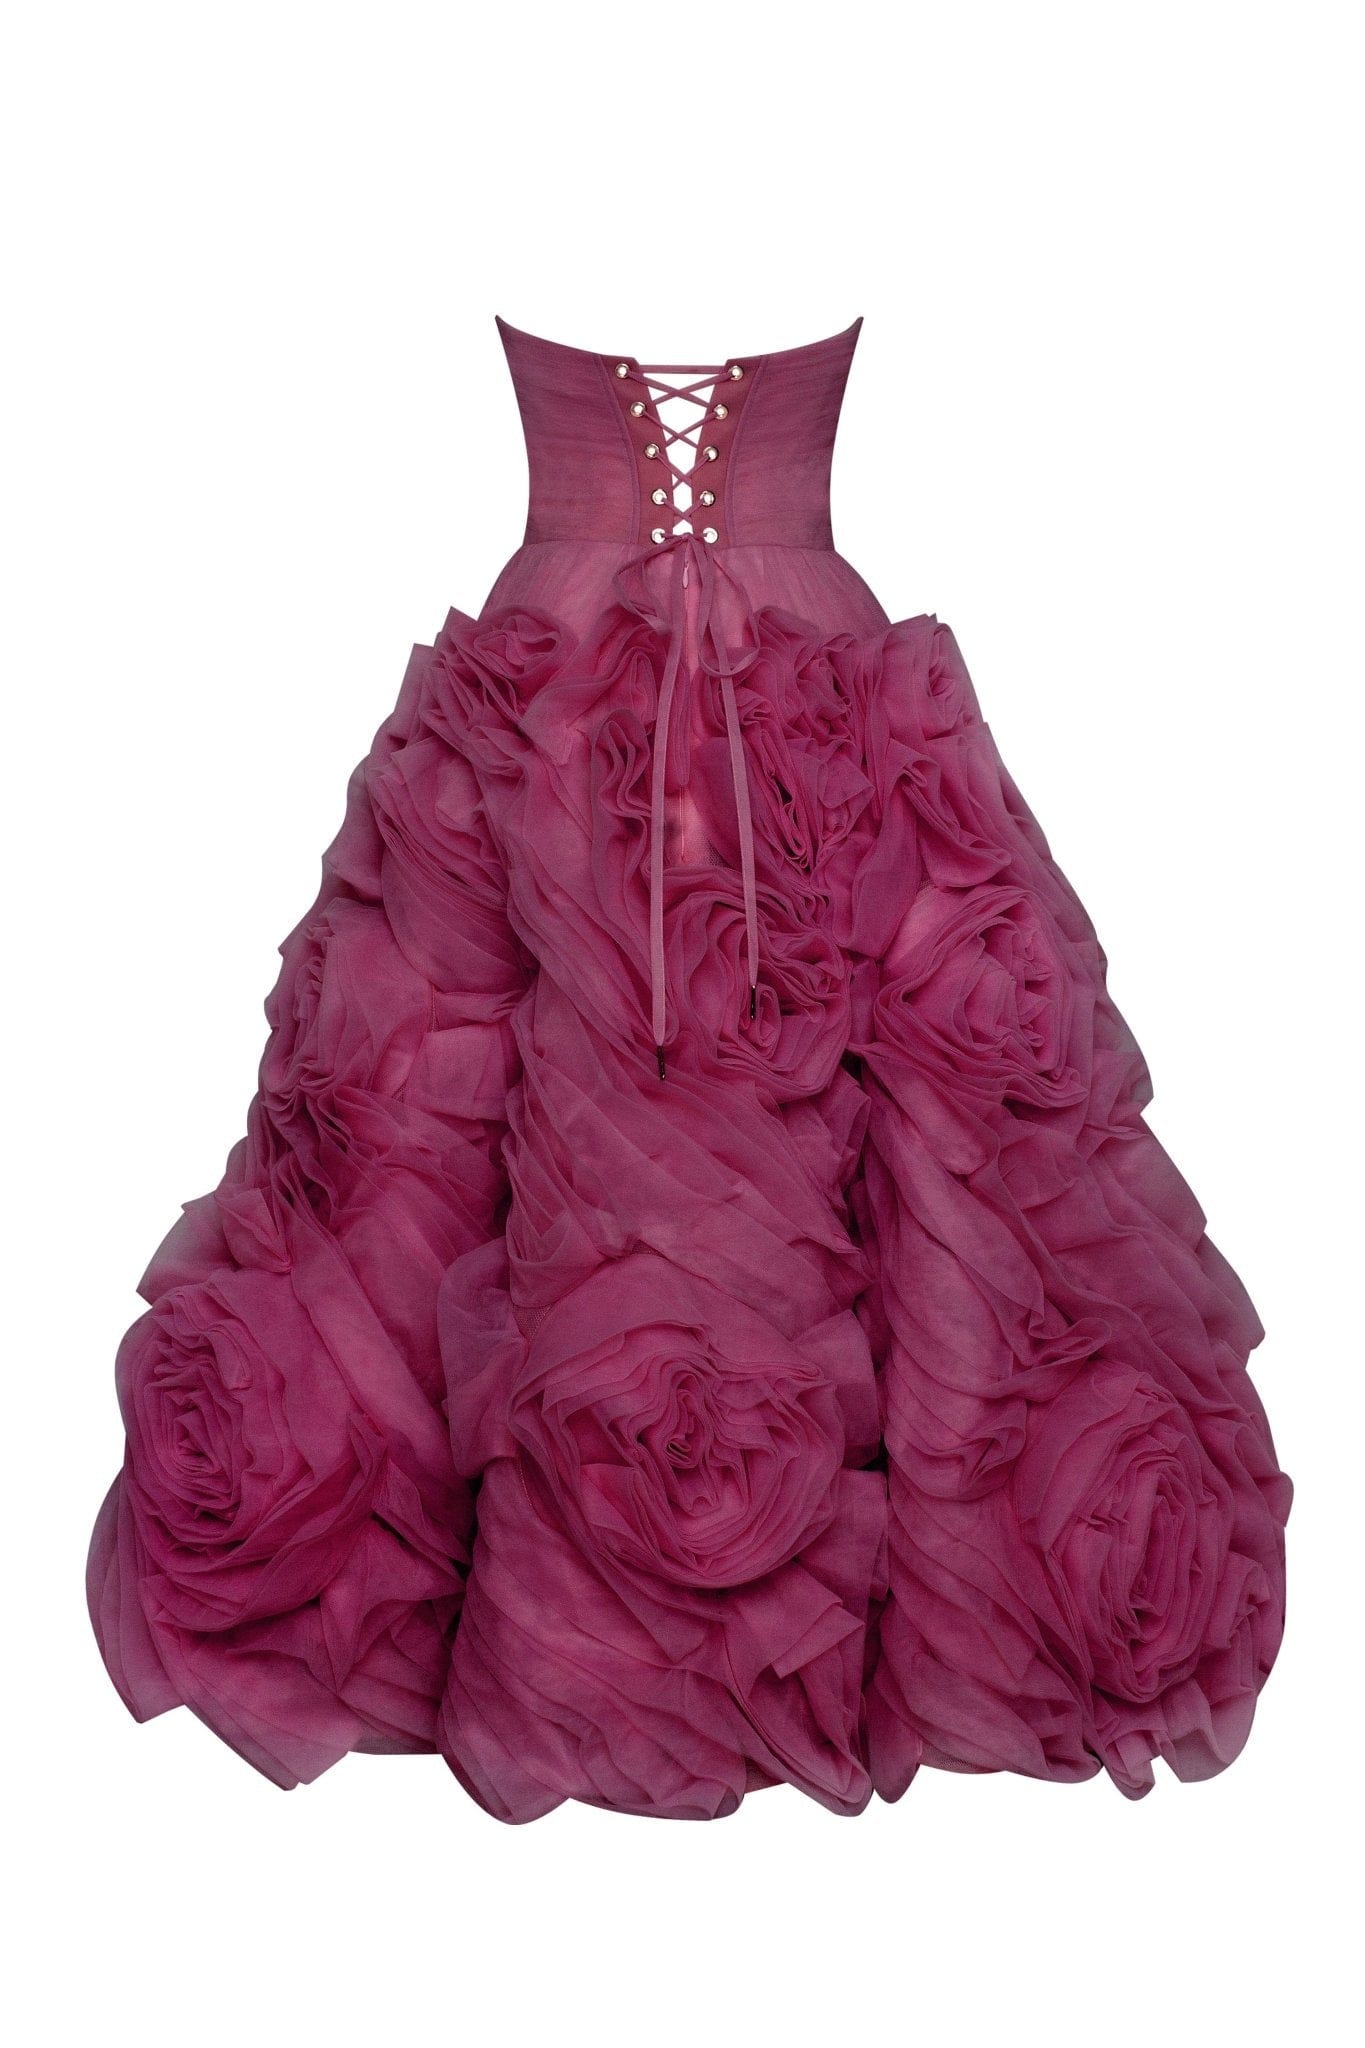 Dramatically flowered tulle dress in wine color - Milla